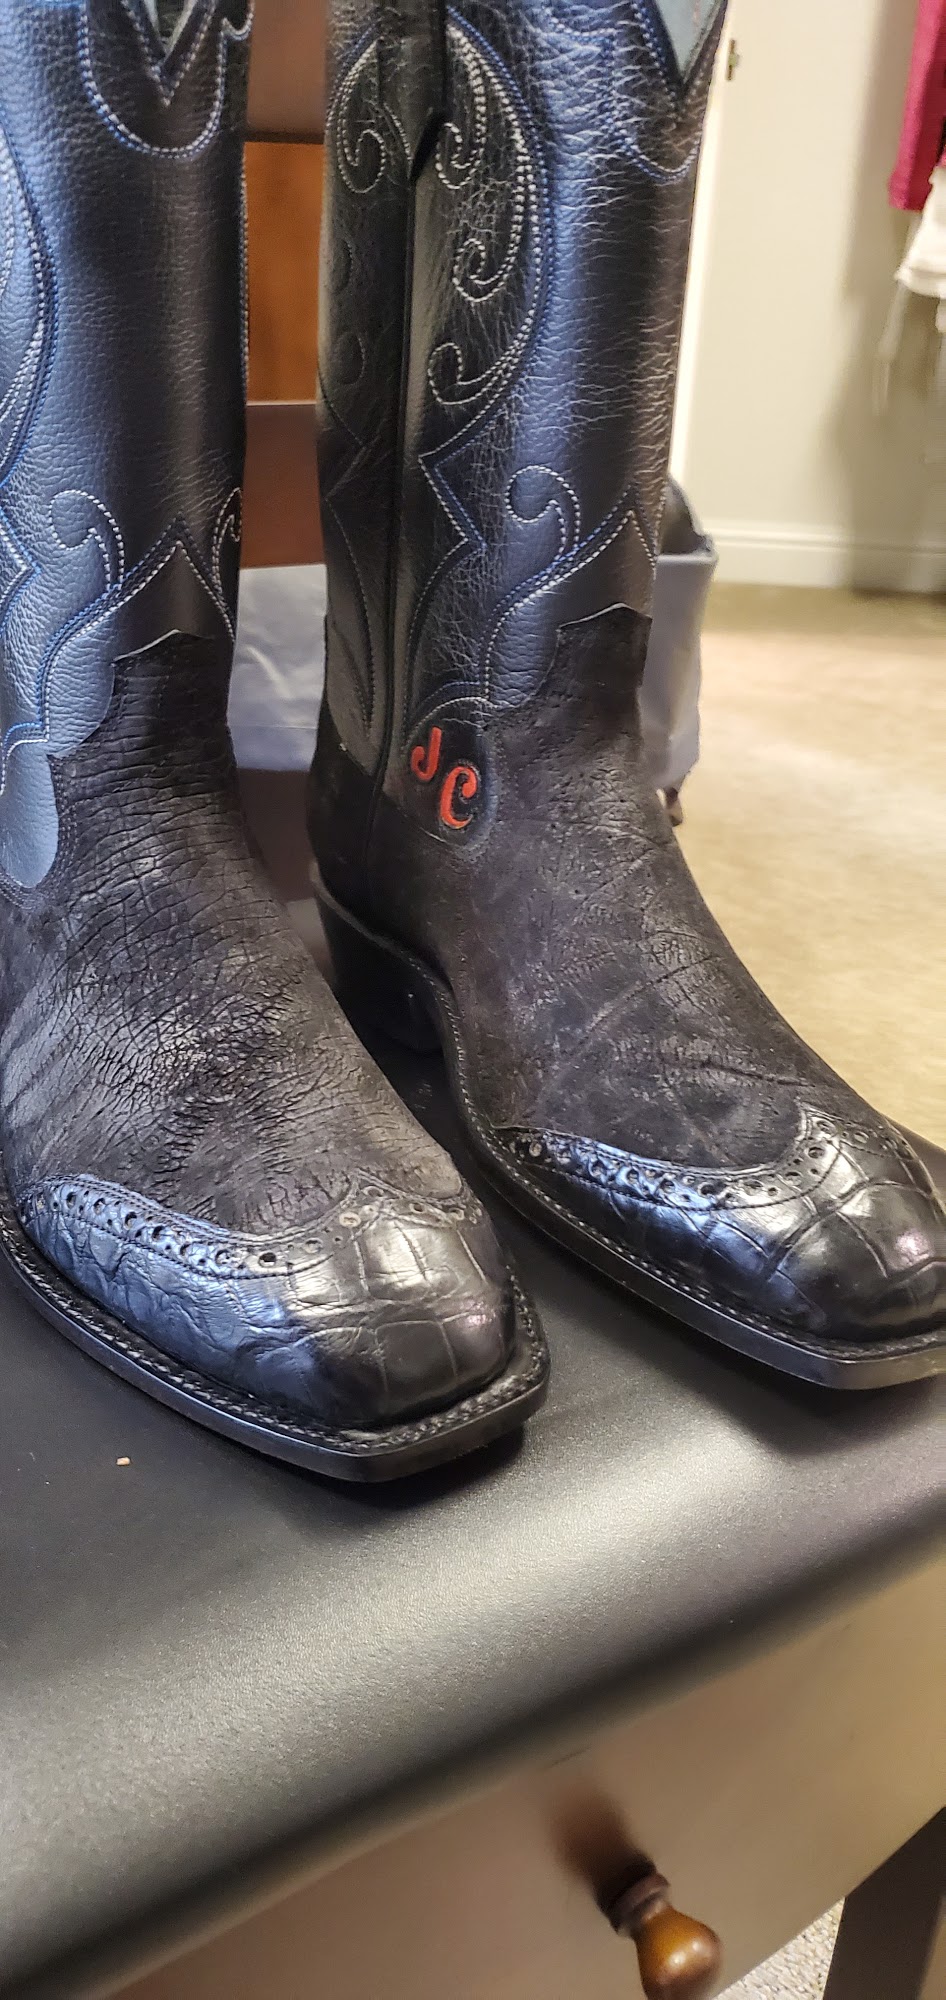 Luis's Custom Shoes & Boot